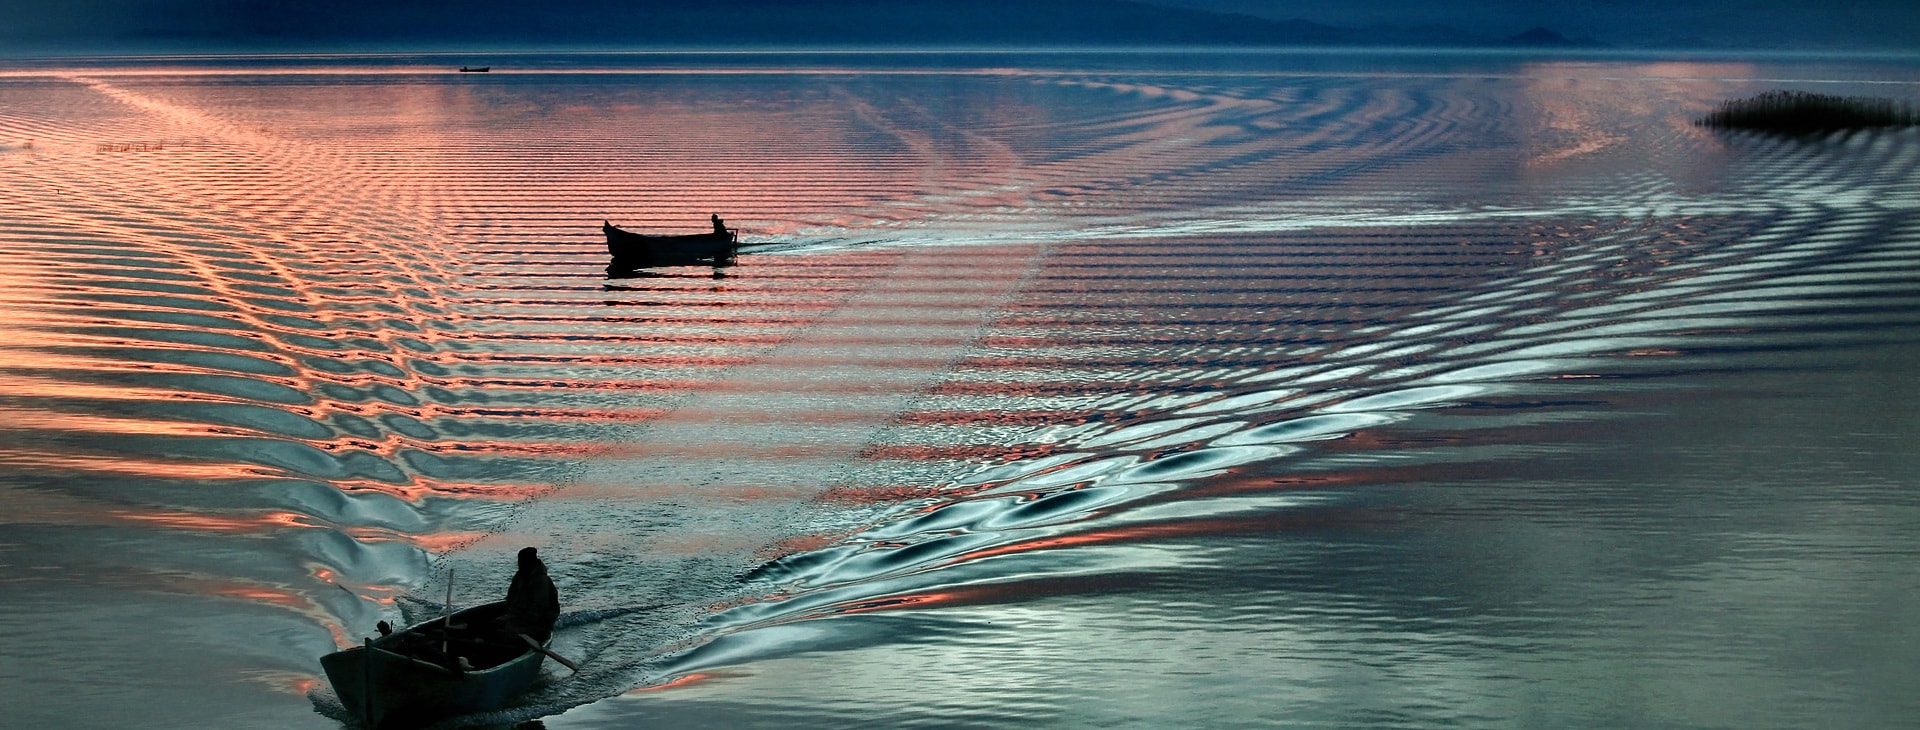 Two fishing boats on a lake in front of a mountain panorama at dusk.